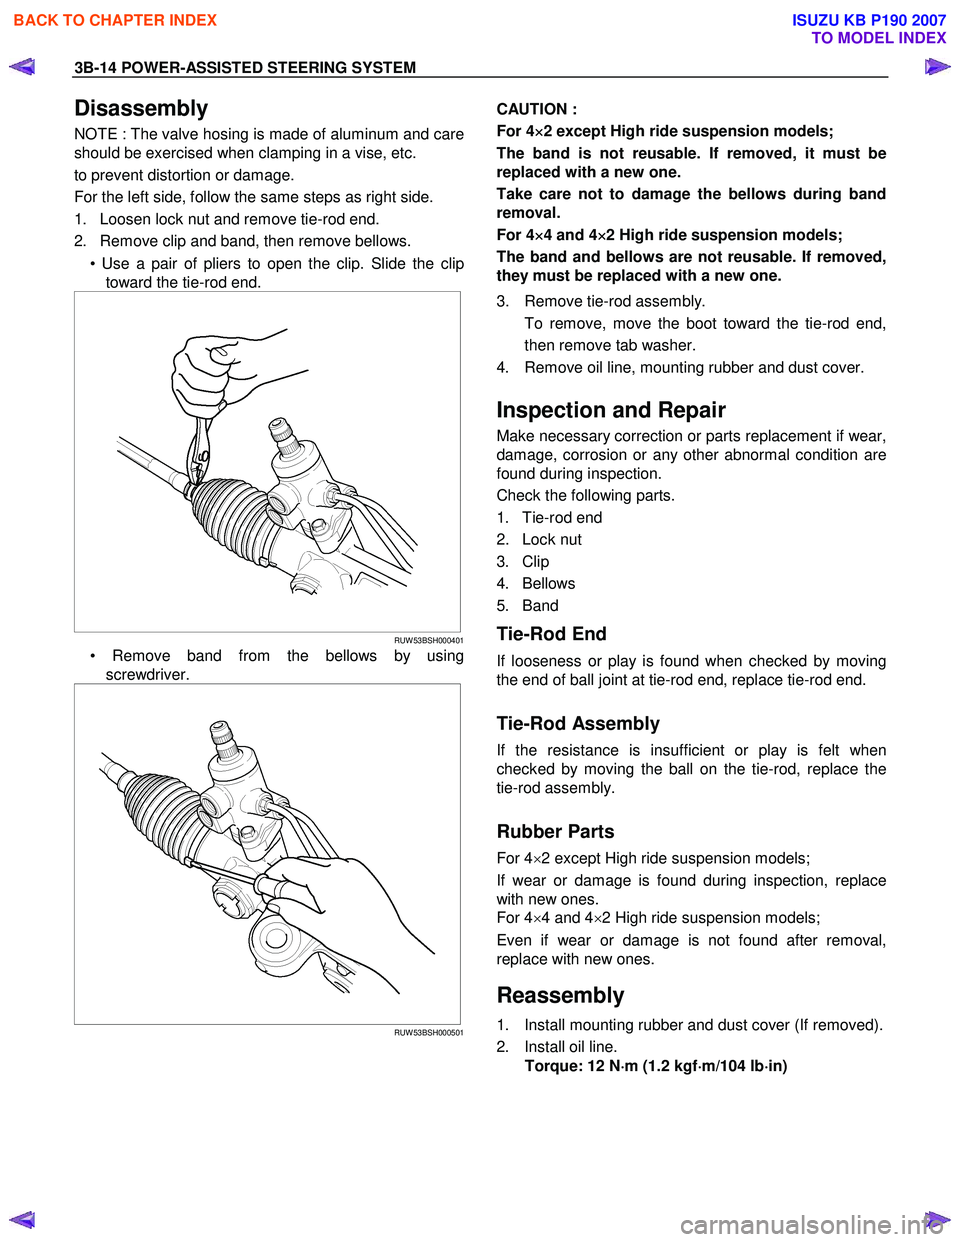 ISUZU KB P190 2007  Workshop Repair Manual 3B-14 POWER-ASSISTED STEERING SYSTEM 
Disassembly 
NOTE : The valve hosing is made of aluminum and care 
should be exercised when clamping in a vise, etc.  
to prevent distortion or damage. 
For the l